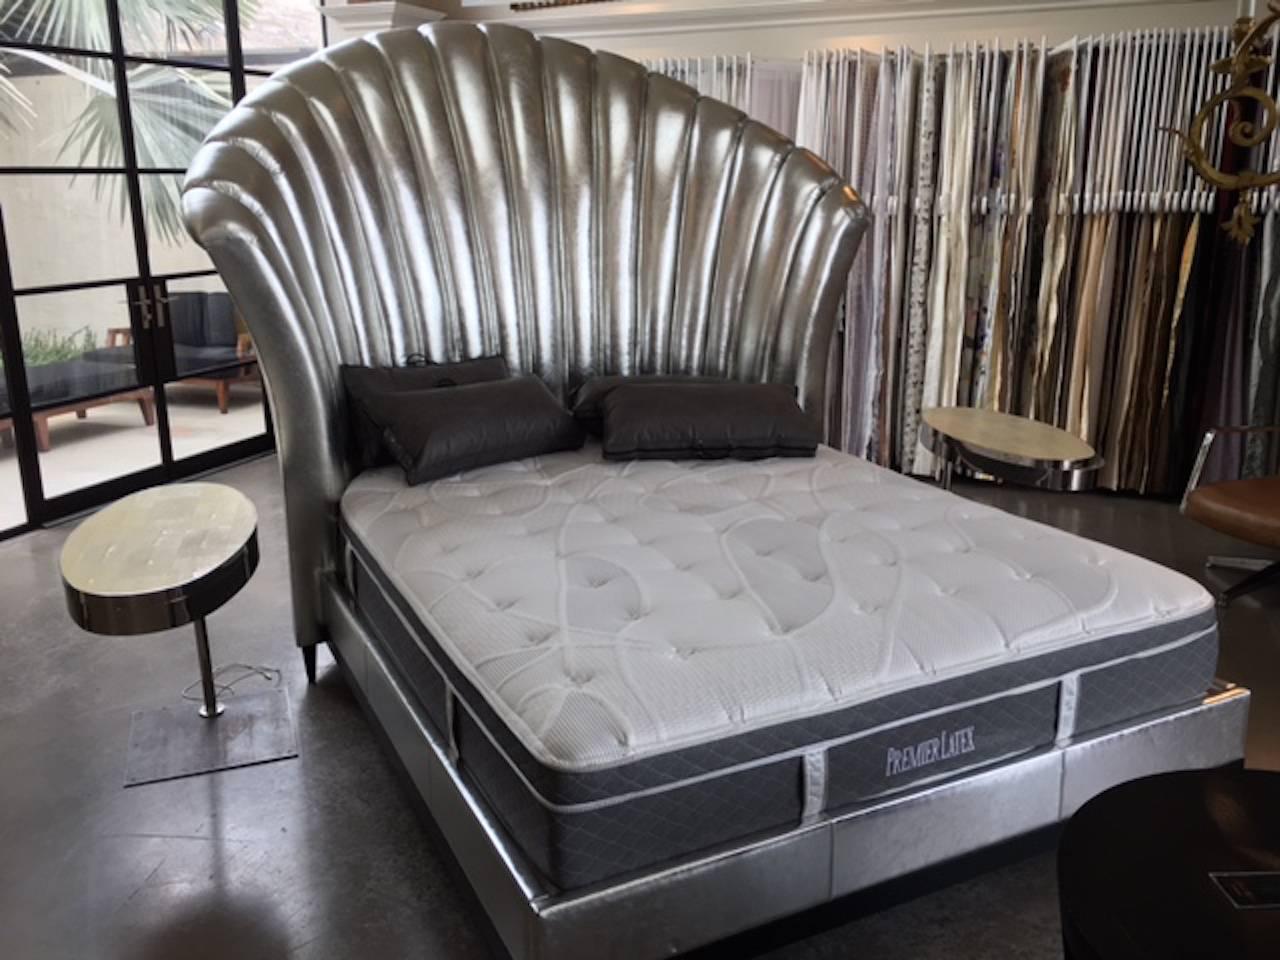 This imposing bed is upholstered in silver Italian leather on an ebonized wood base that supports the silver leather surround for the box spring. The dimensions are derived from Hollywood booths where you could sit comfortably. Thank you Mommie